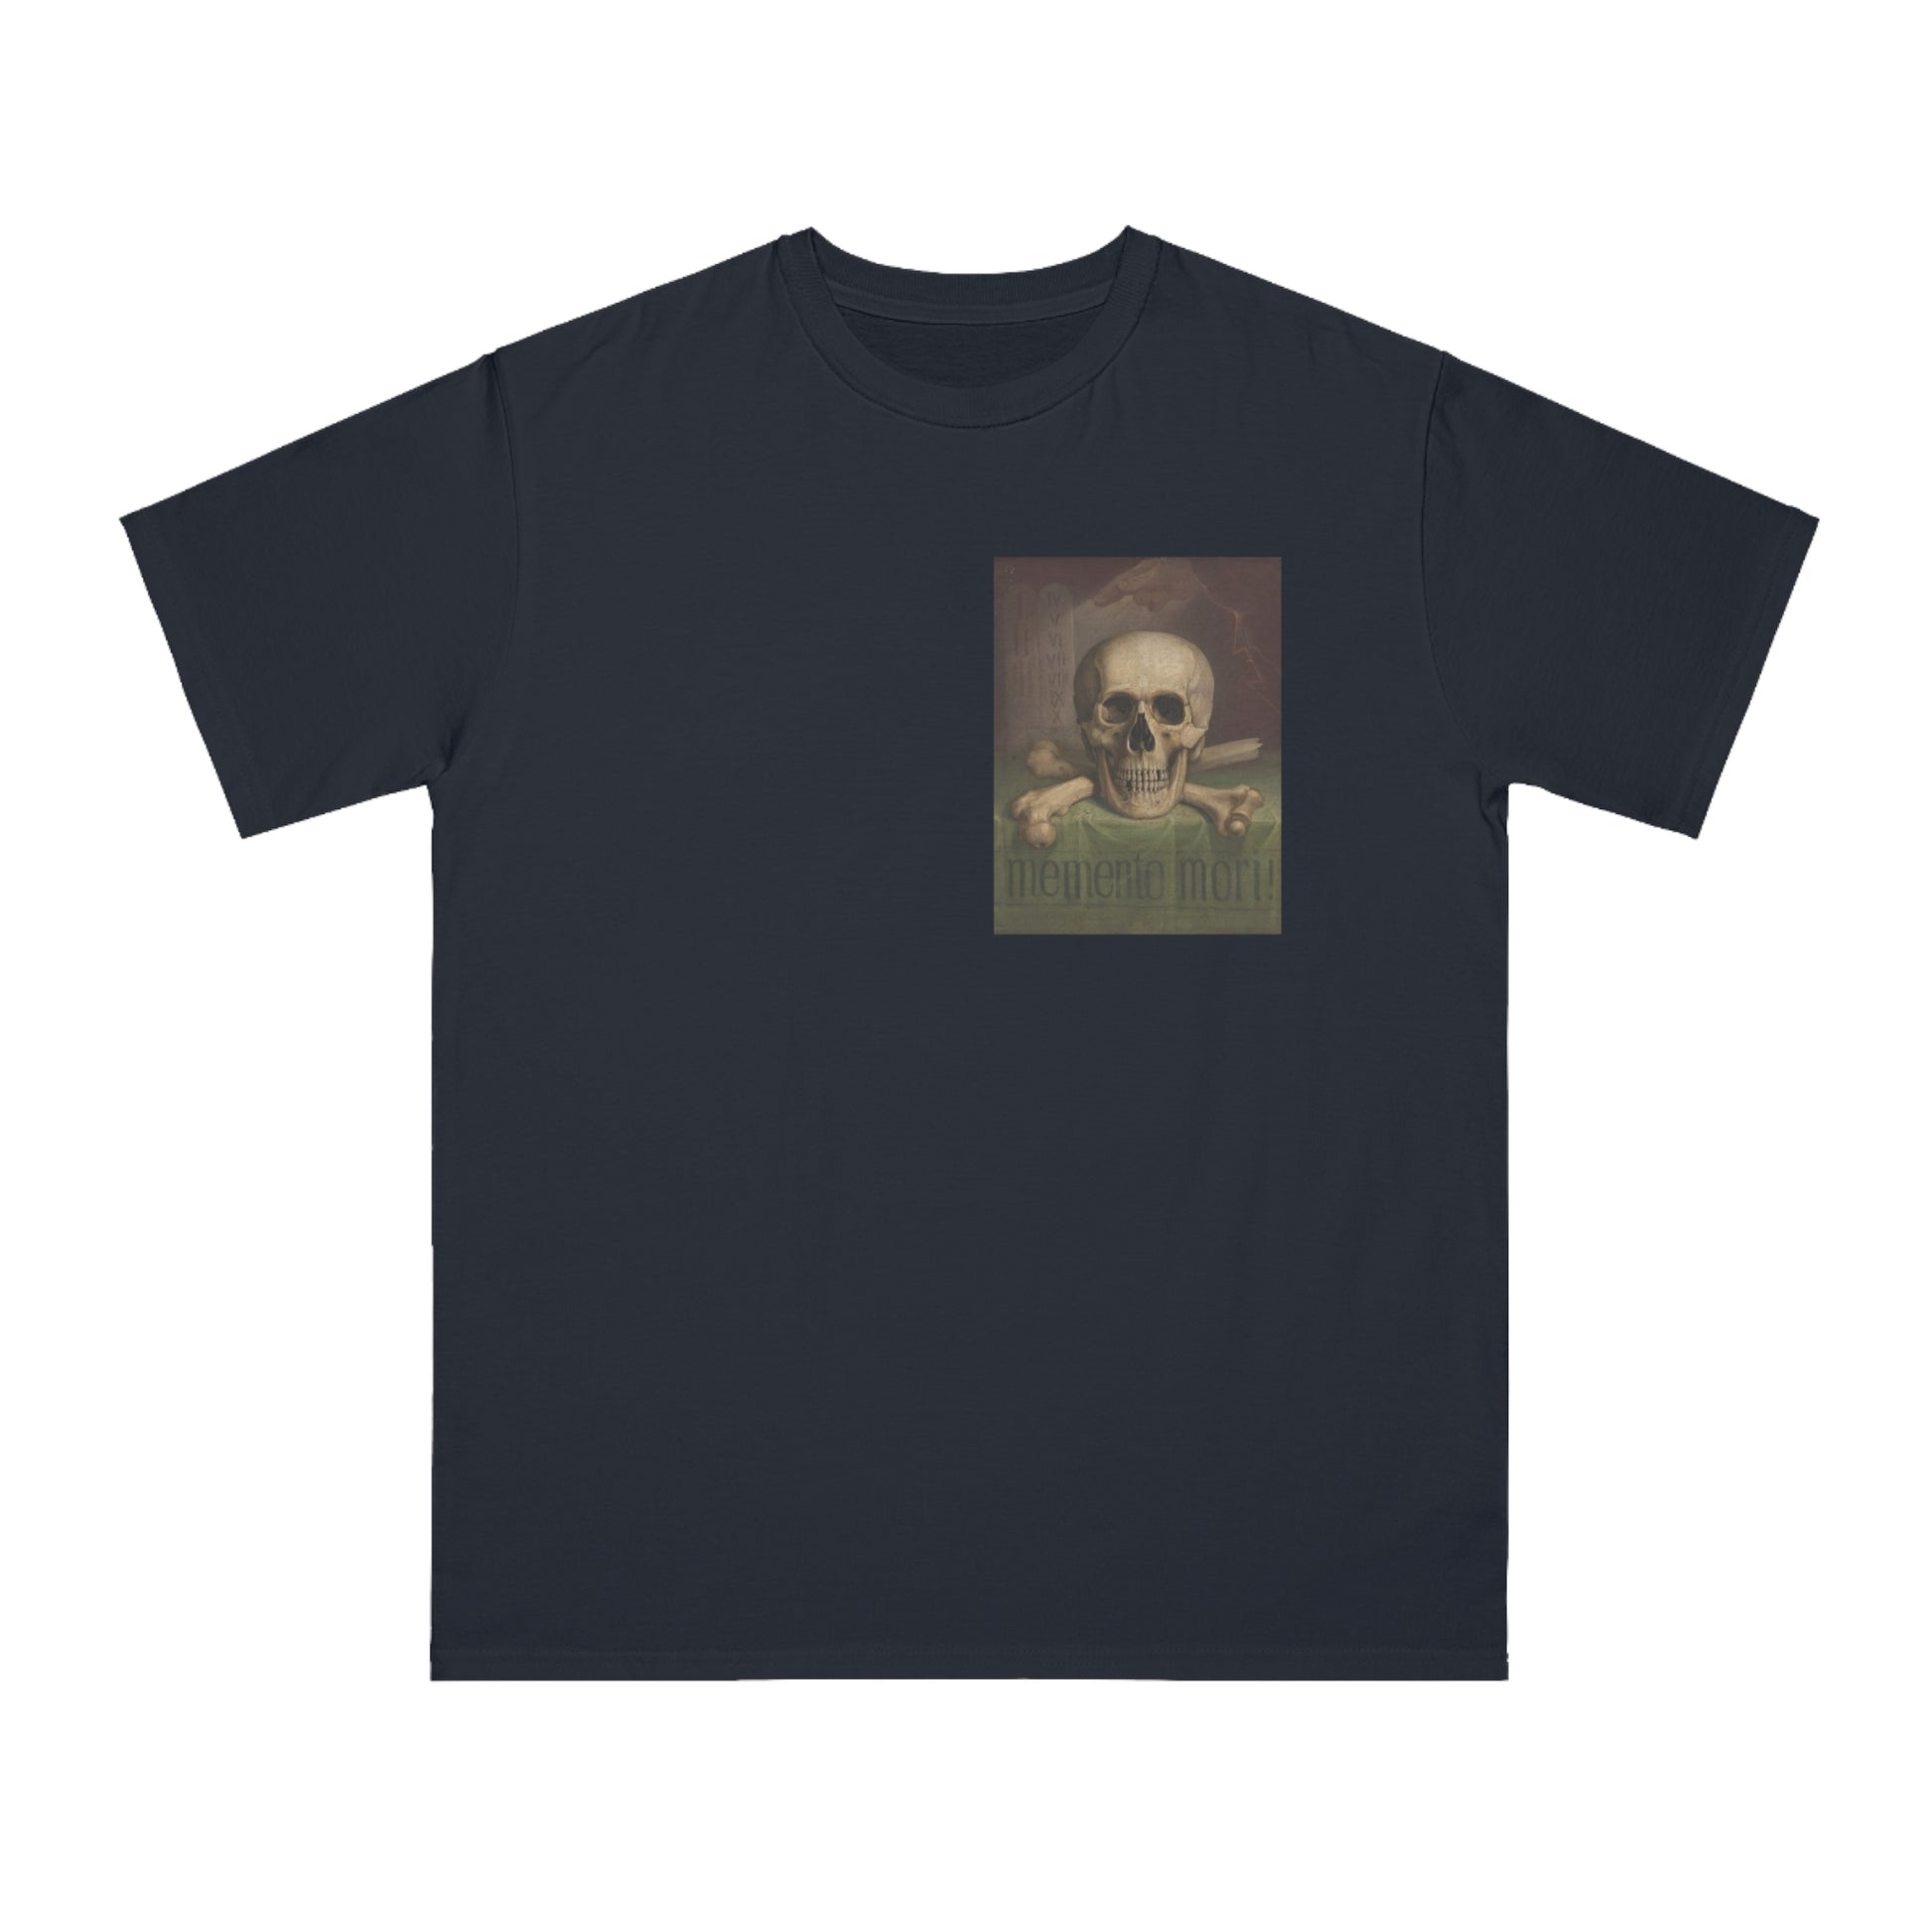 a t - shirt with a picture of a skeleton on it